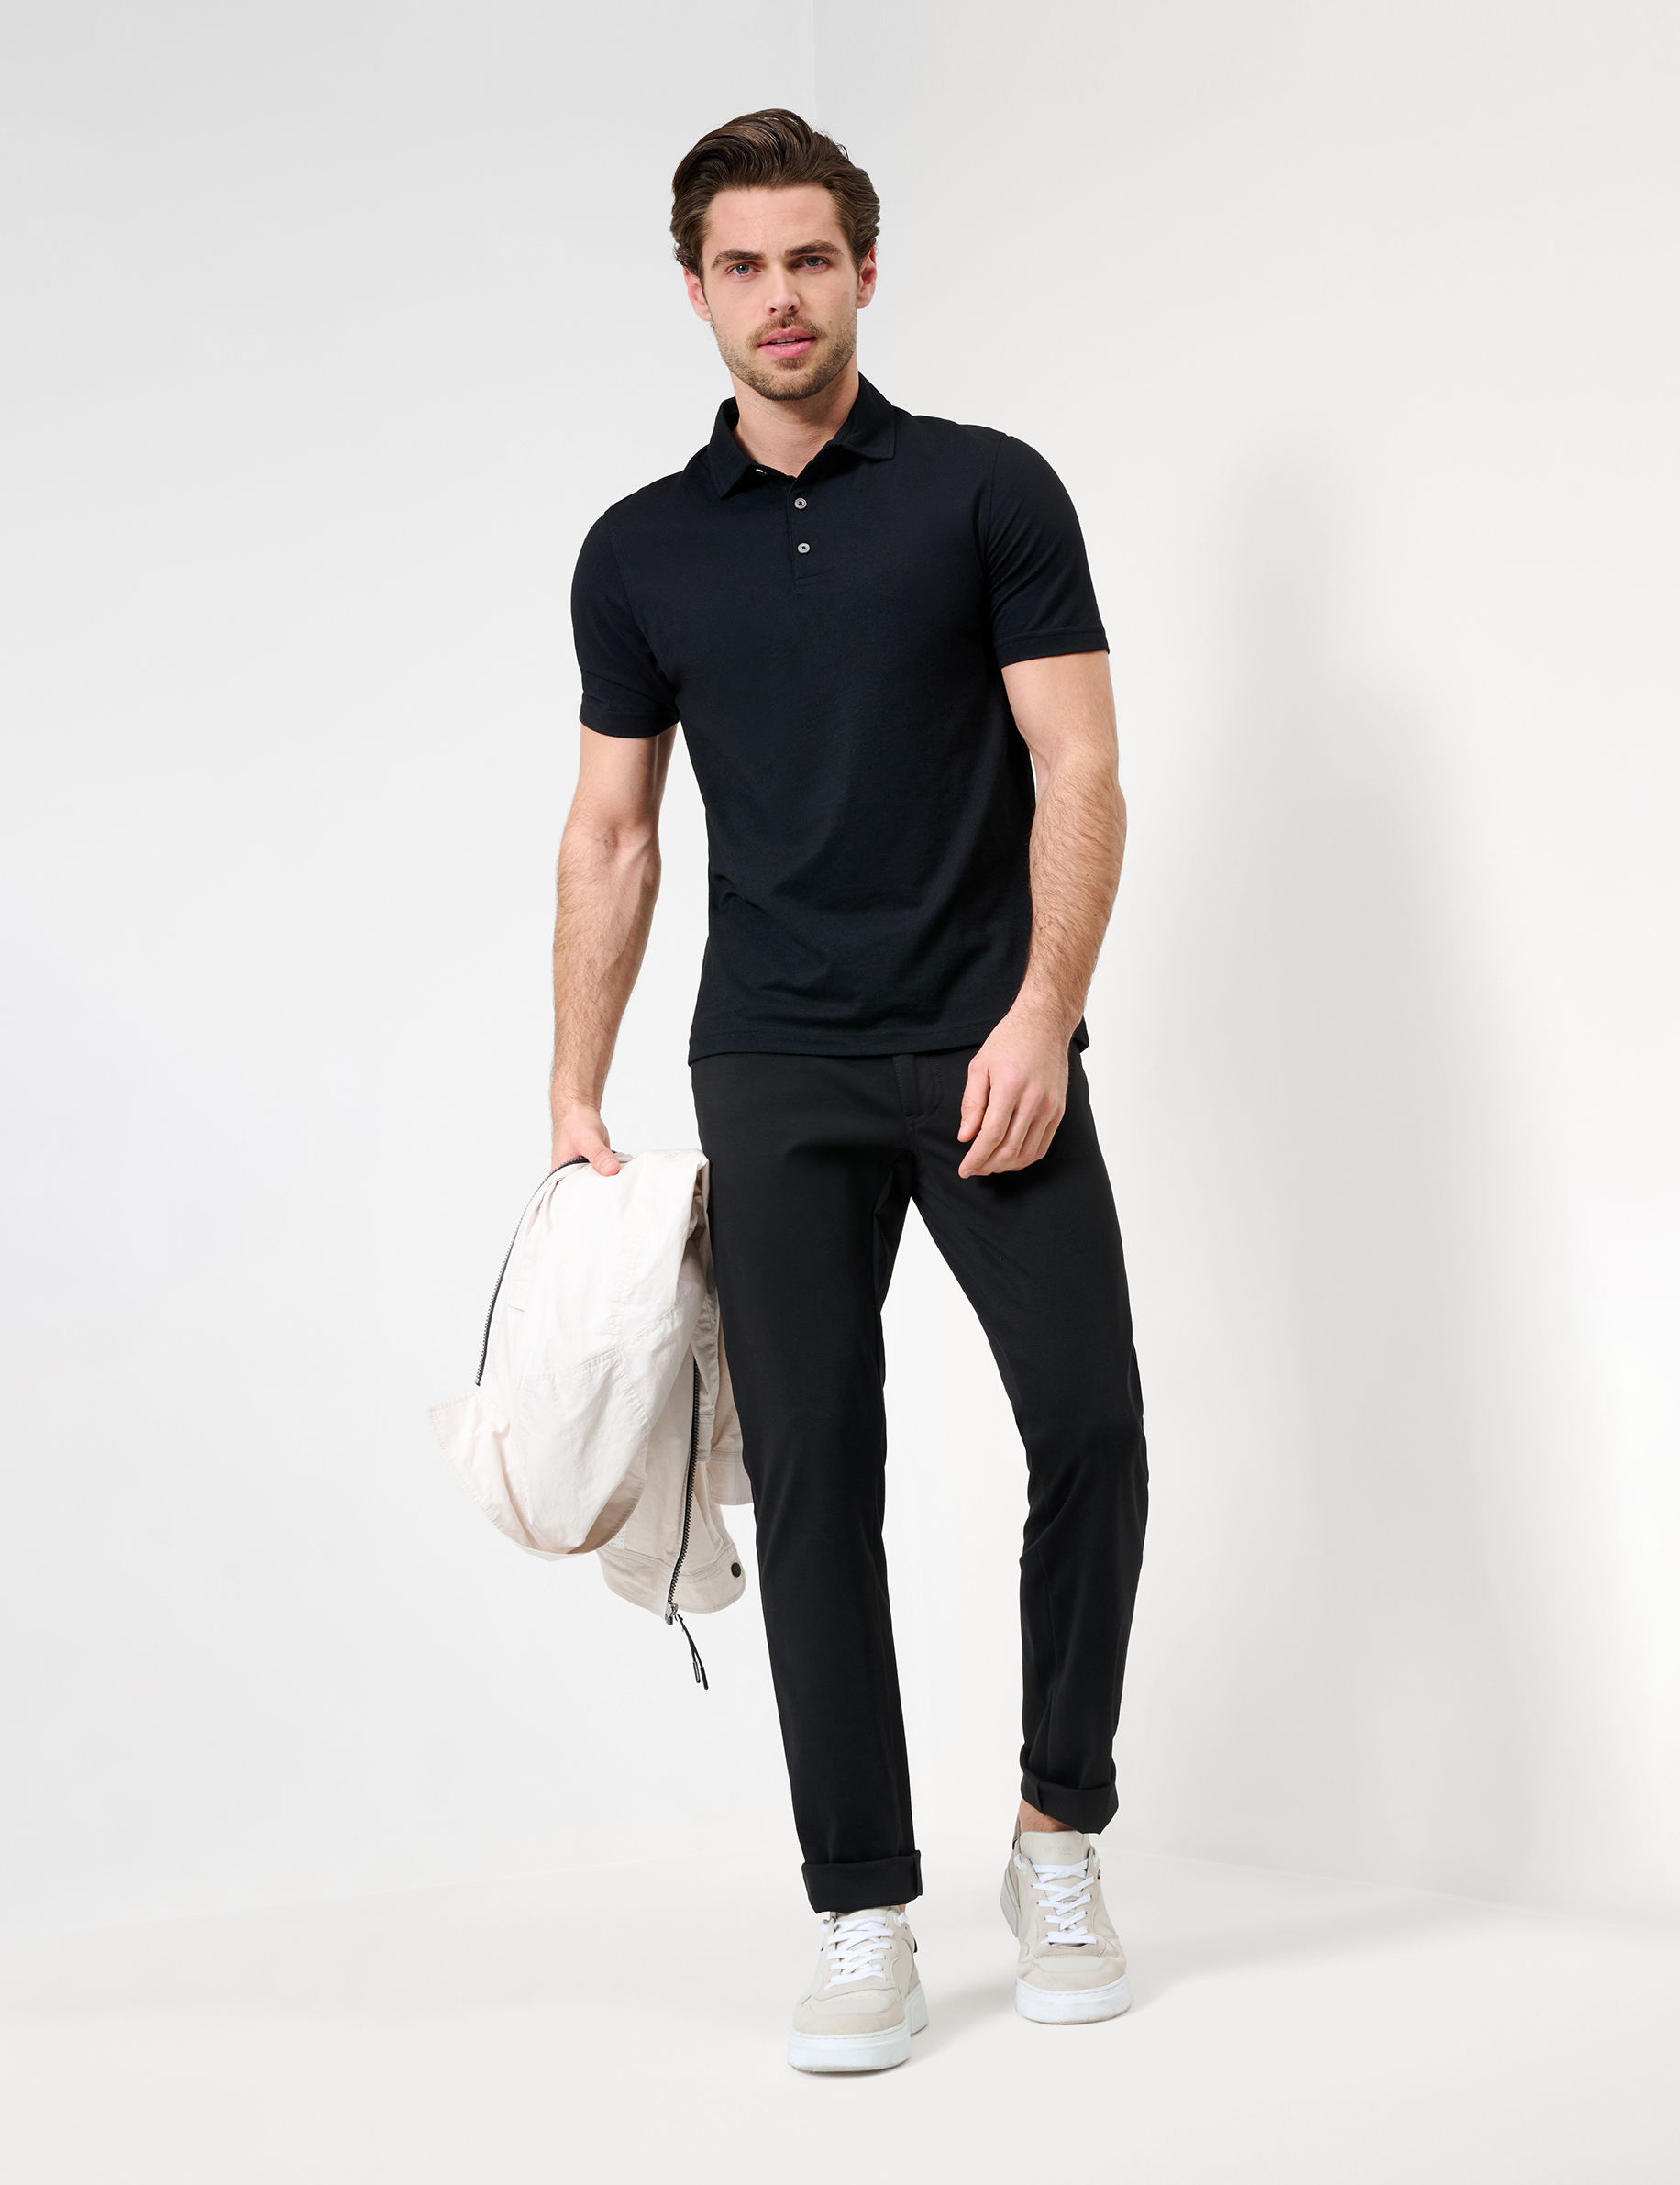 Men Style PEPE black  Model Outfit